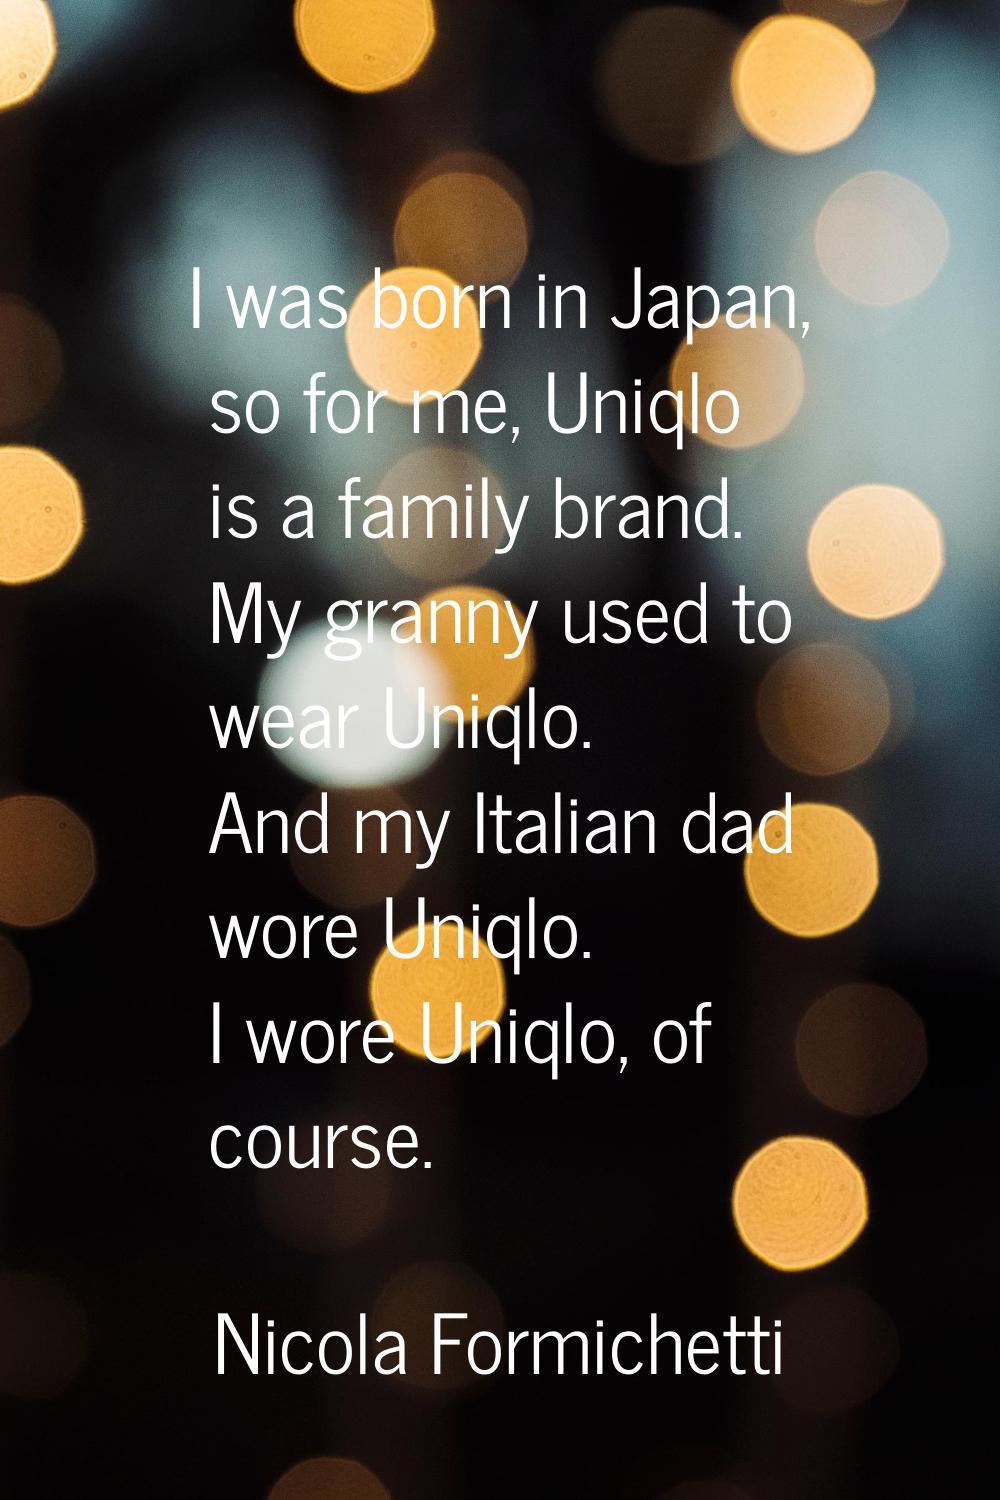 I was born in Japan, so for me, Uniqlo is a family brand. My granny used to wear Uniqlo. And my Ita